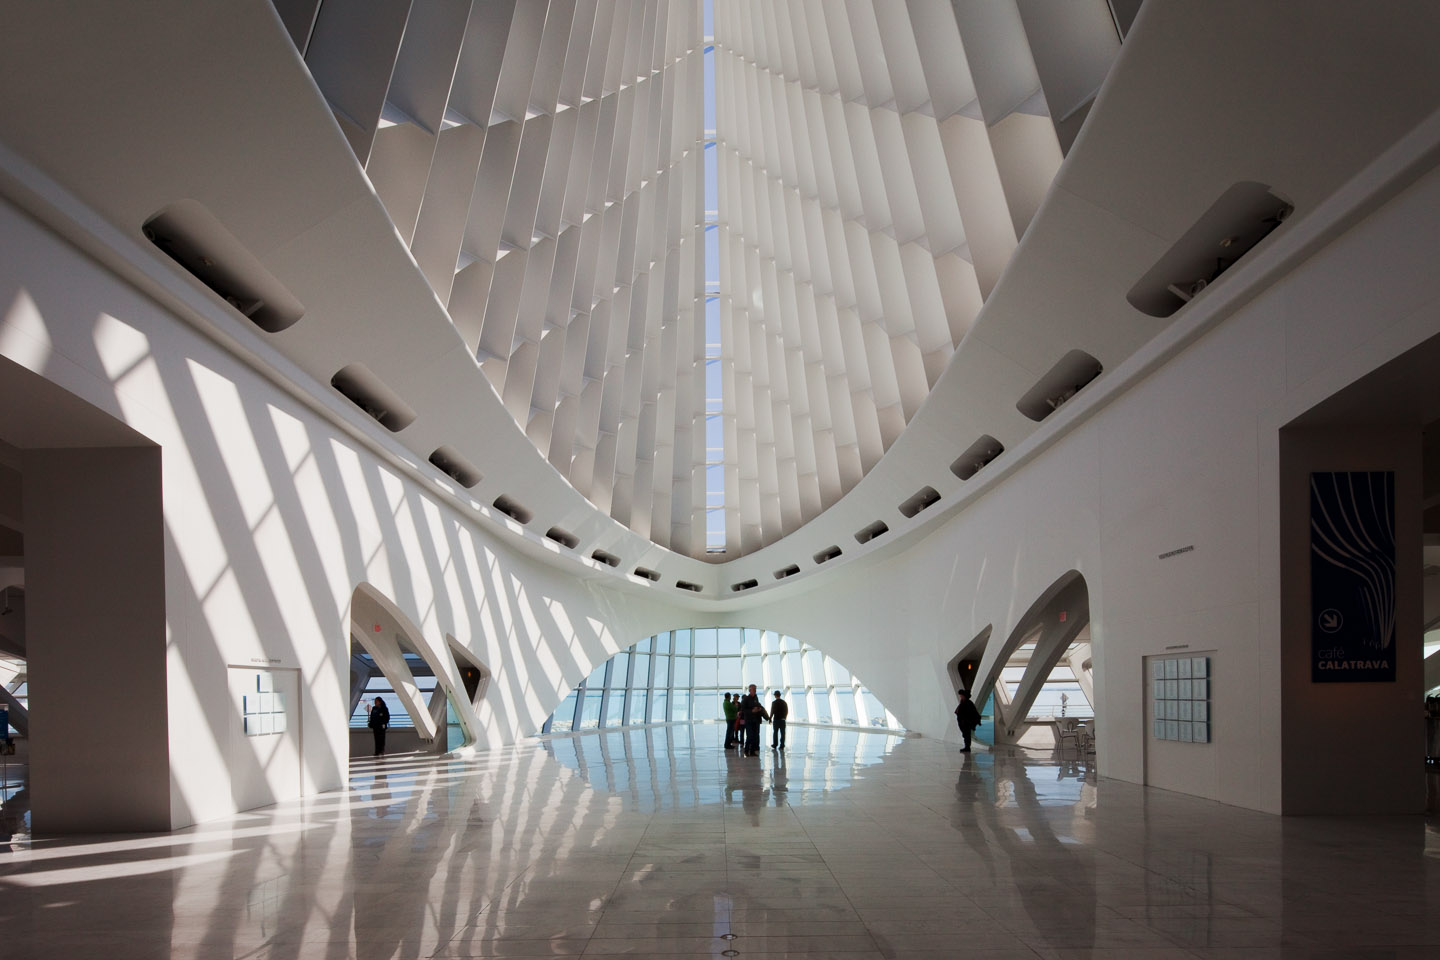 the main gallery space with vaulted glass ceiling at the Milwaukee Art Museum, designed by Santiago Calatrava, photographed by Jacob Rosenfeld